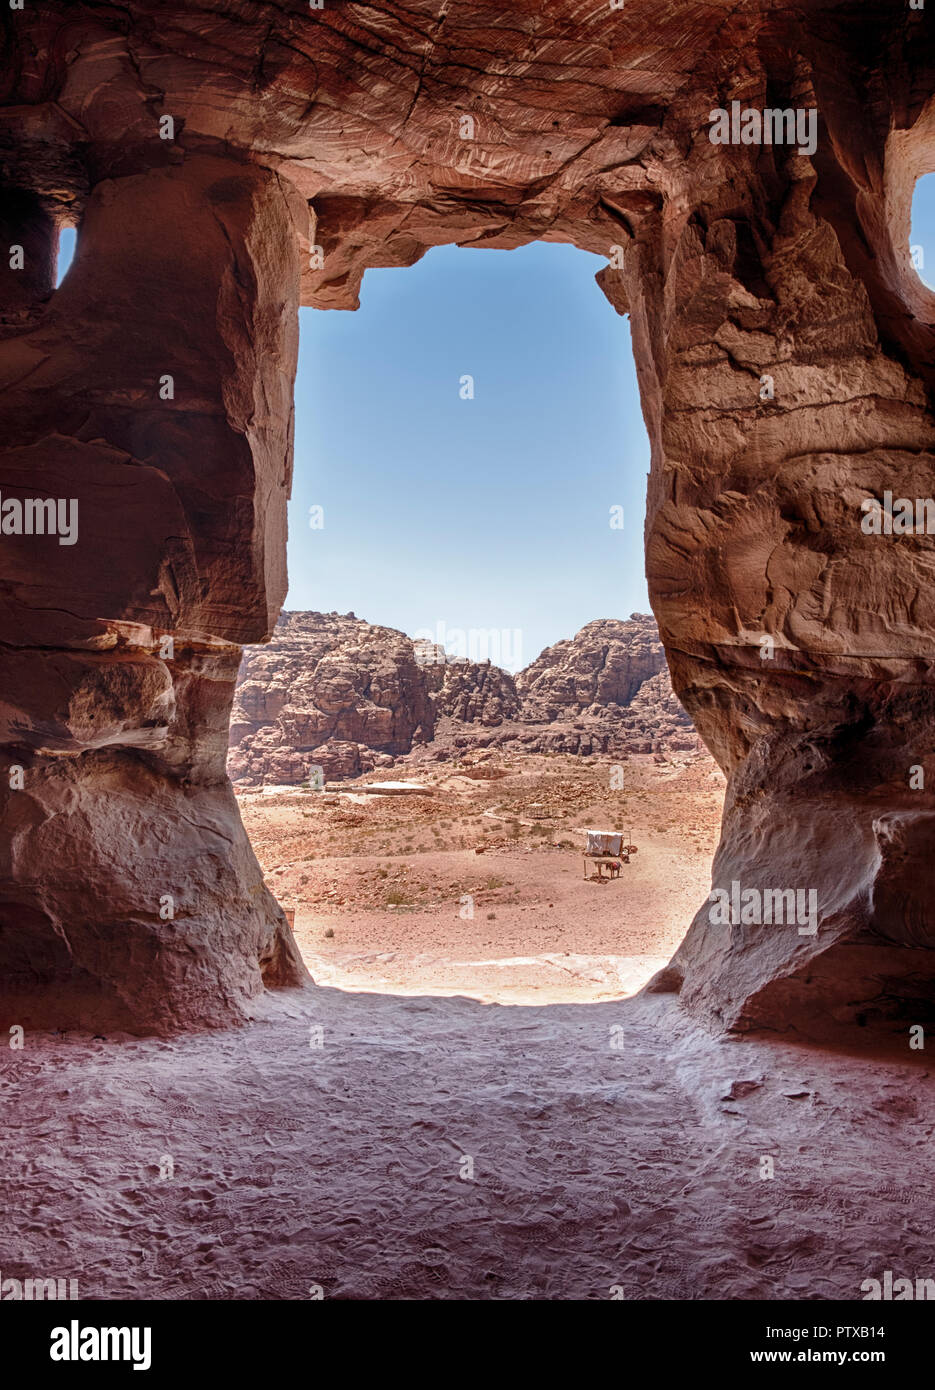 A view of the mountains of Petra through the stone entrance of one of the Royal Tombs. Stock Photo